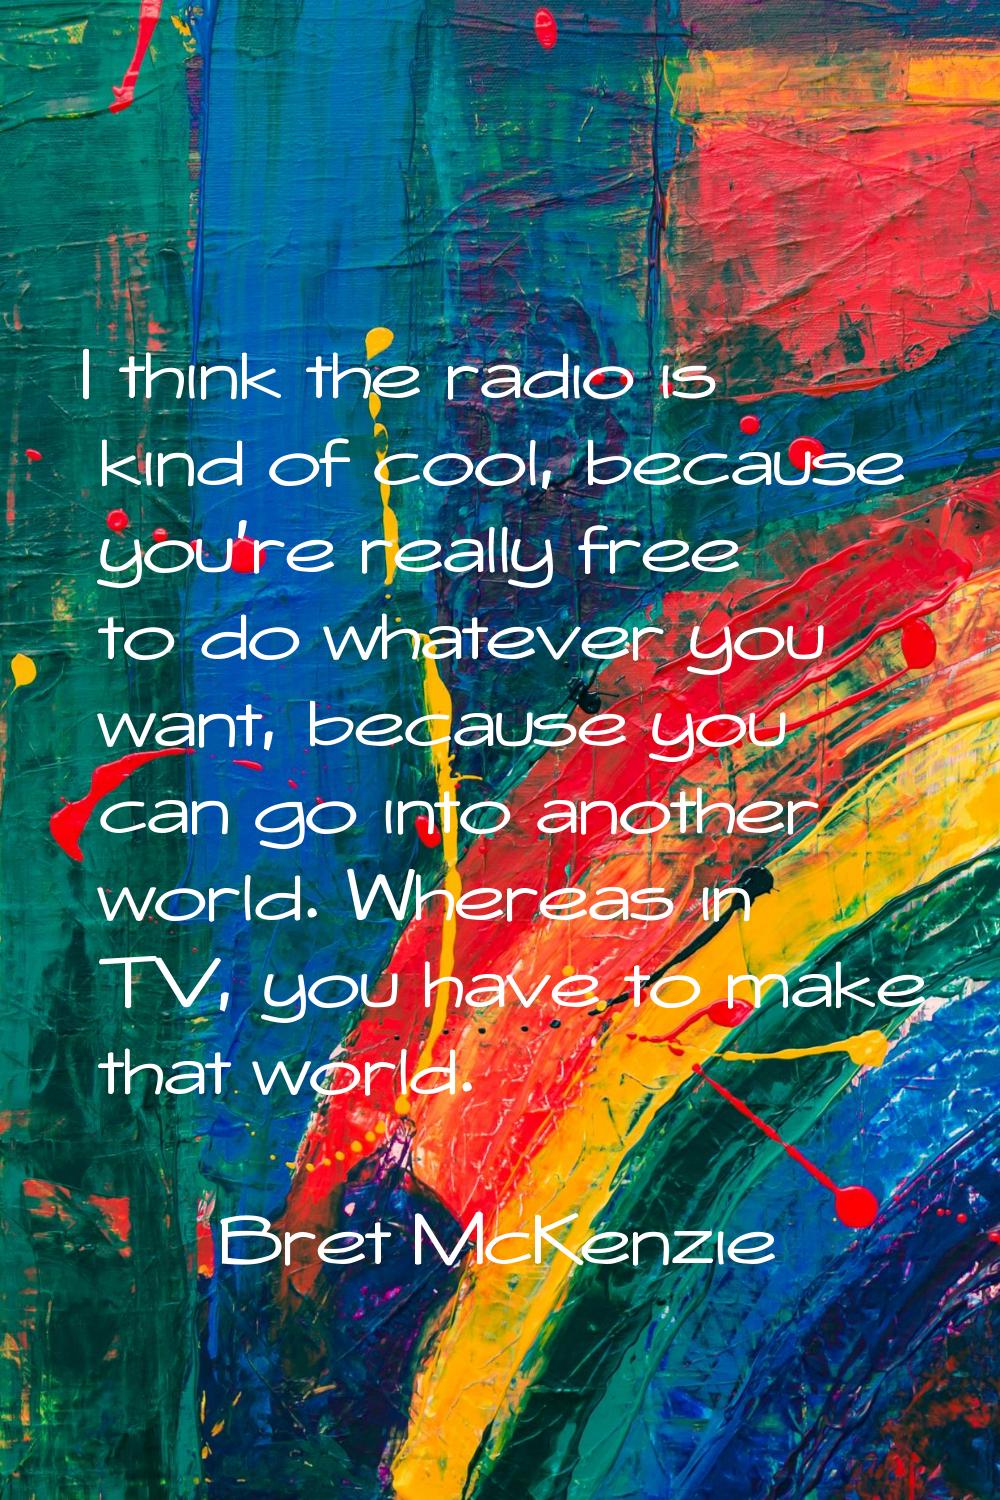 I think the radio is kind of cool, because you're really free to do whatever you want, because you 